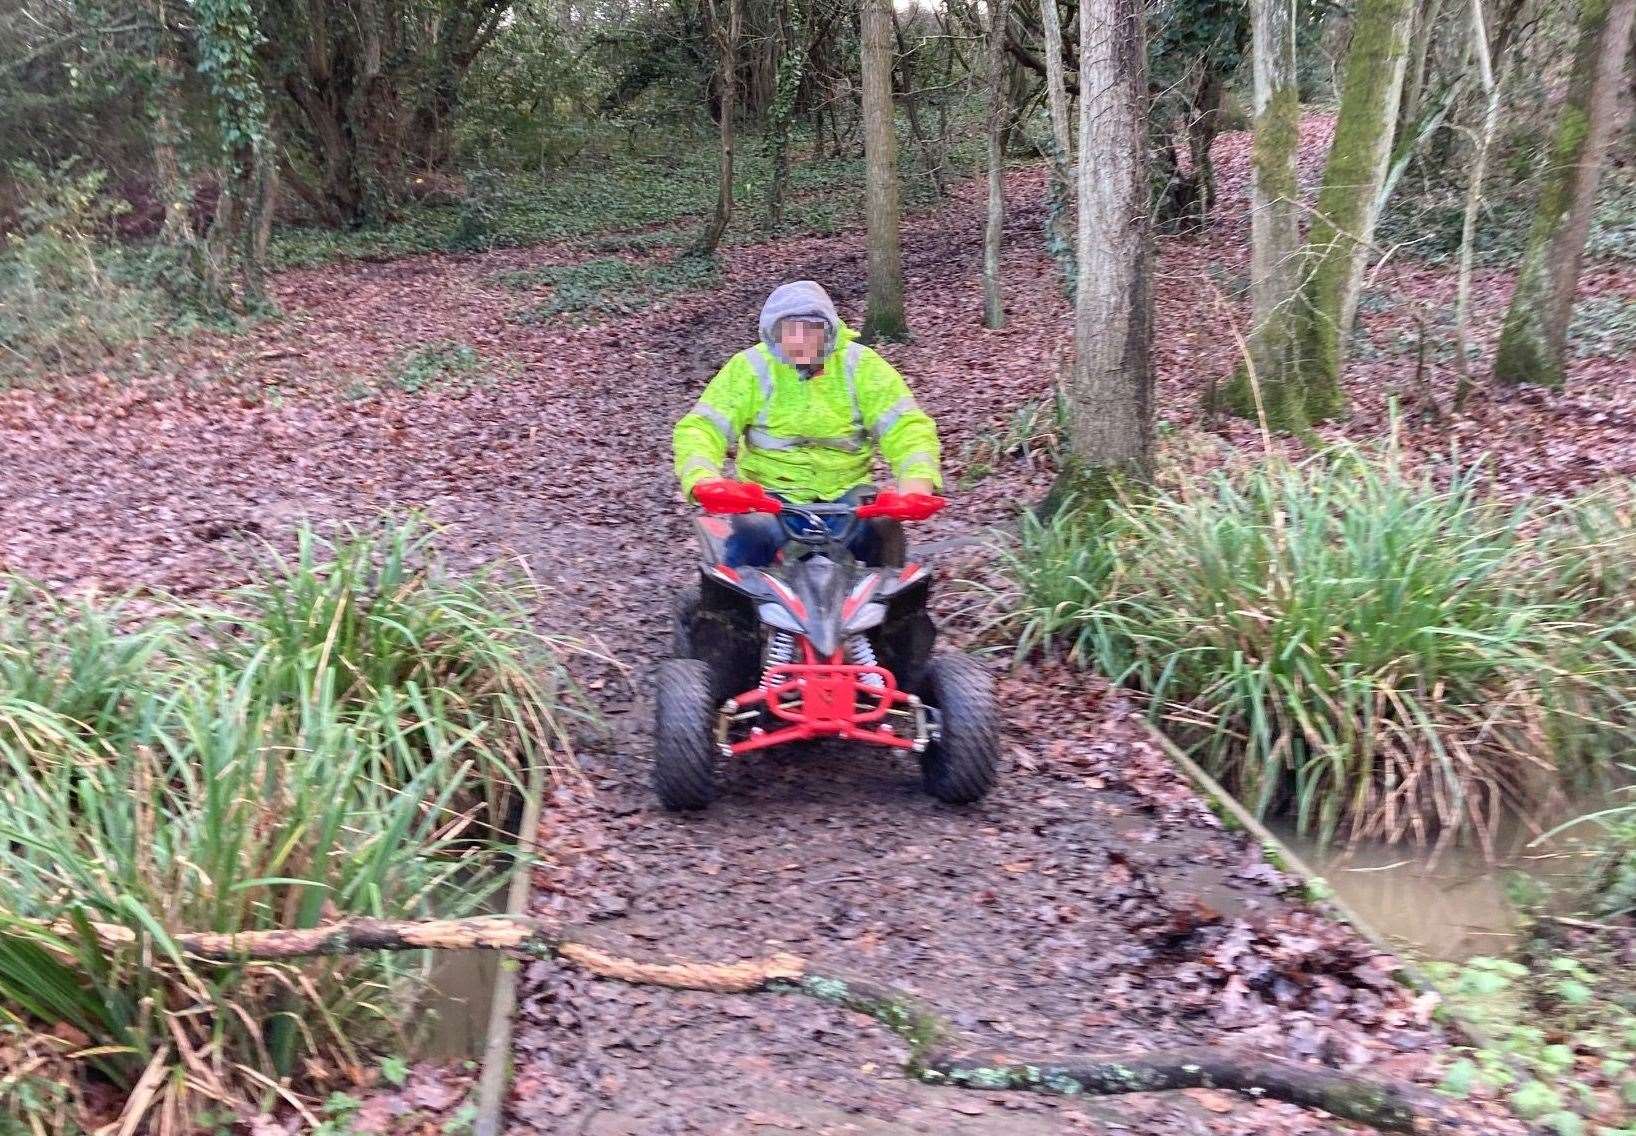 The man on the quad bike at Duncan Down in Whitstable. Picture: Ashley Clark